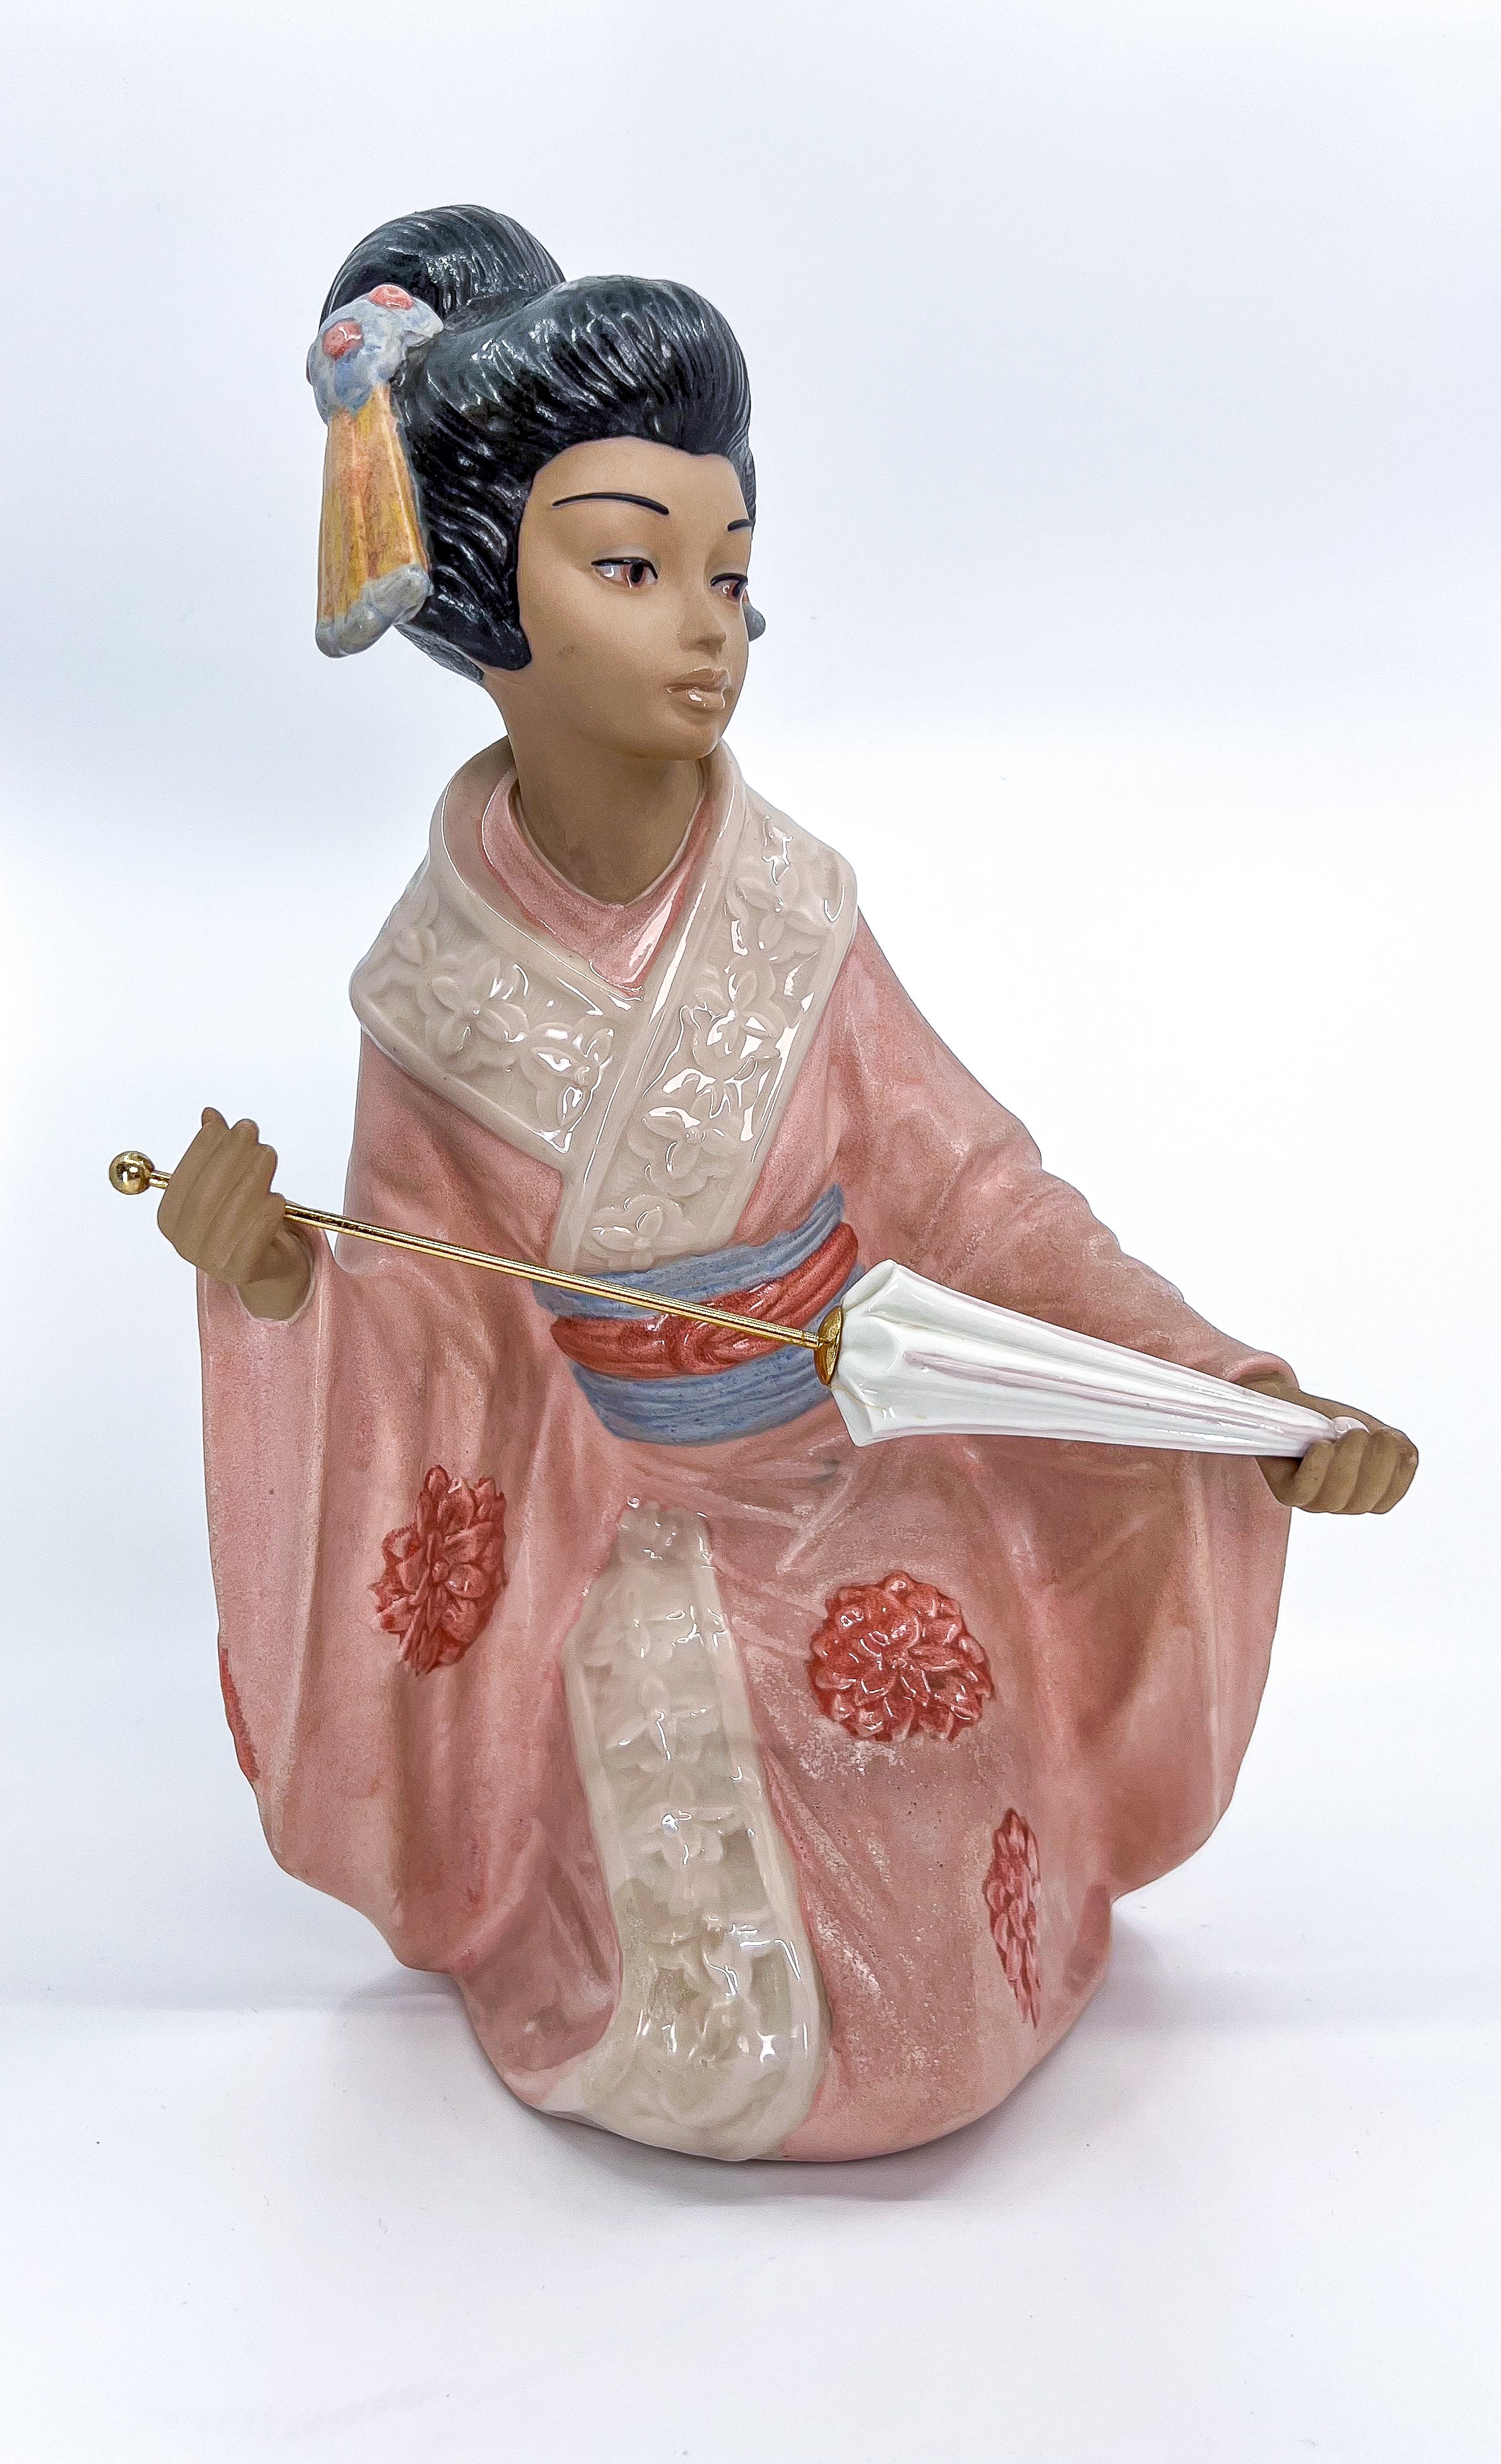 Nadal porcelain figurine Geisha in pink dress with flowers and parasol.

The Japanese Geisha has spent much time and careful attention in order to look beautiful. She is dressed in all her magnificent finery. Her kimono is covered with red flowers